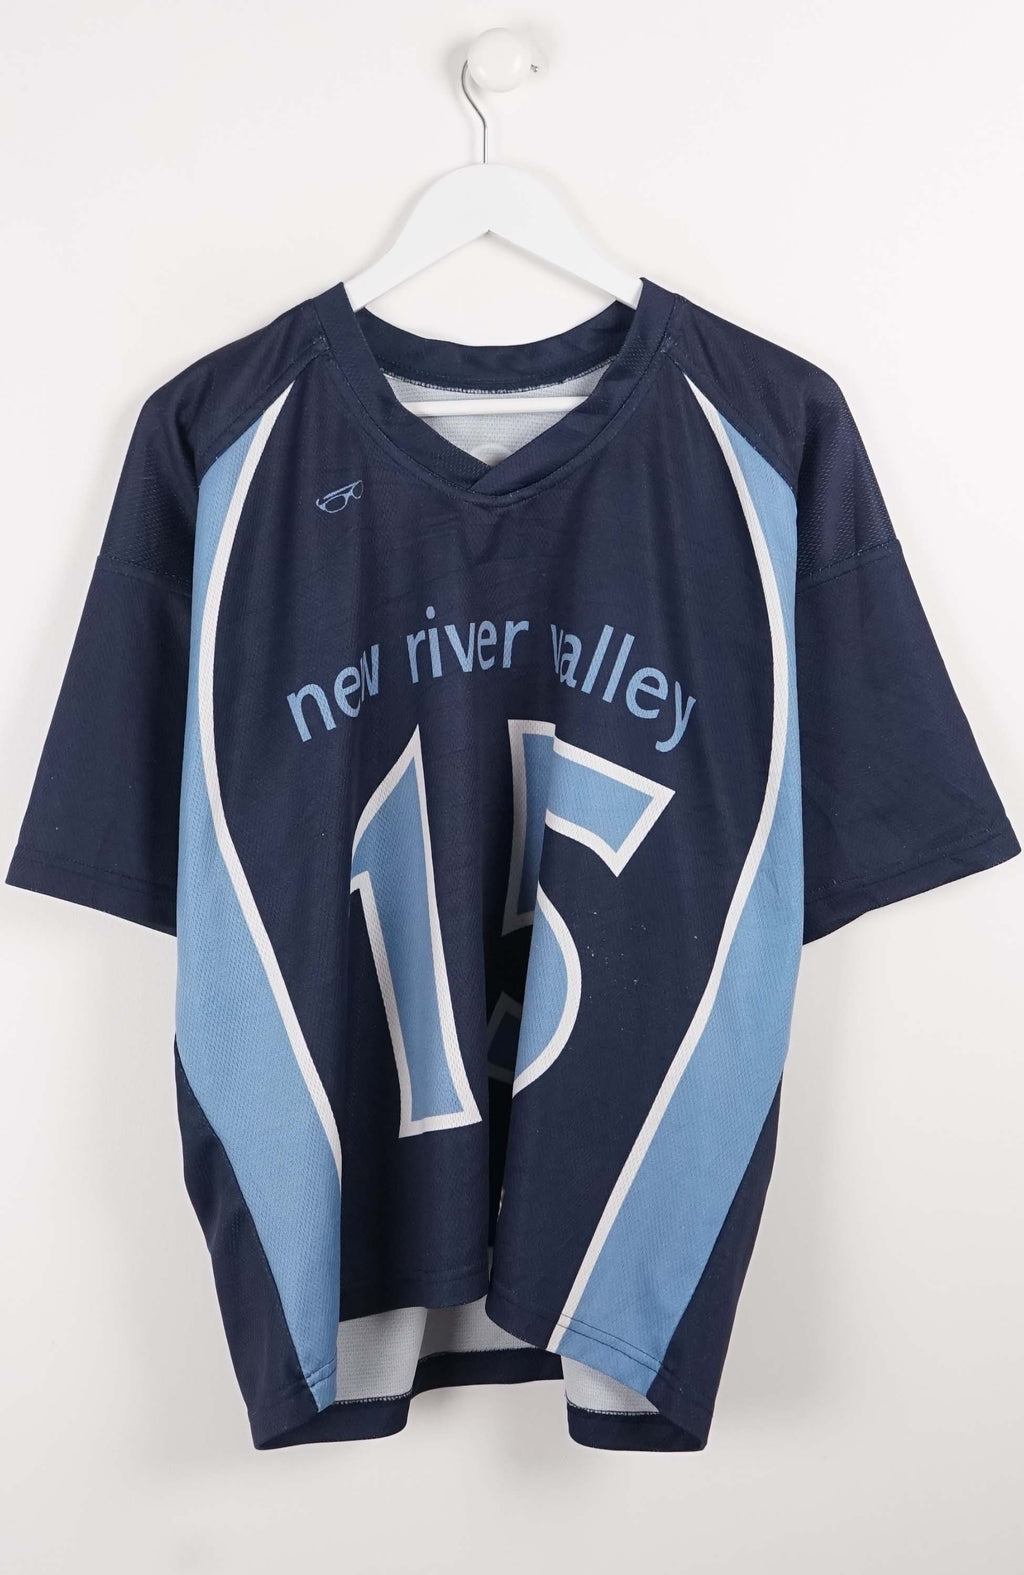 VINTAGE NRVLC VOLLYBALL JERSEY (XL) CROPPED